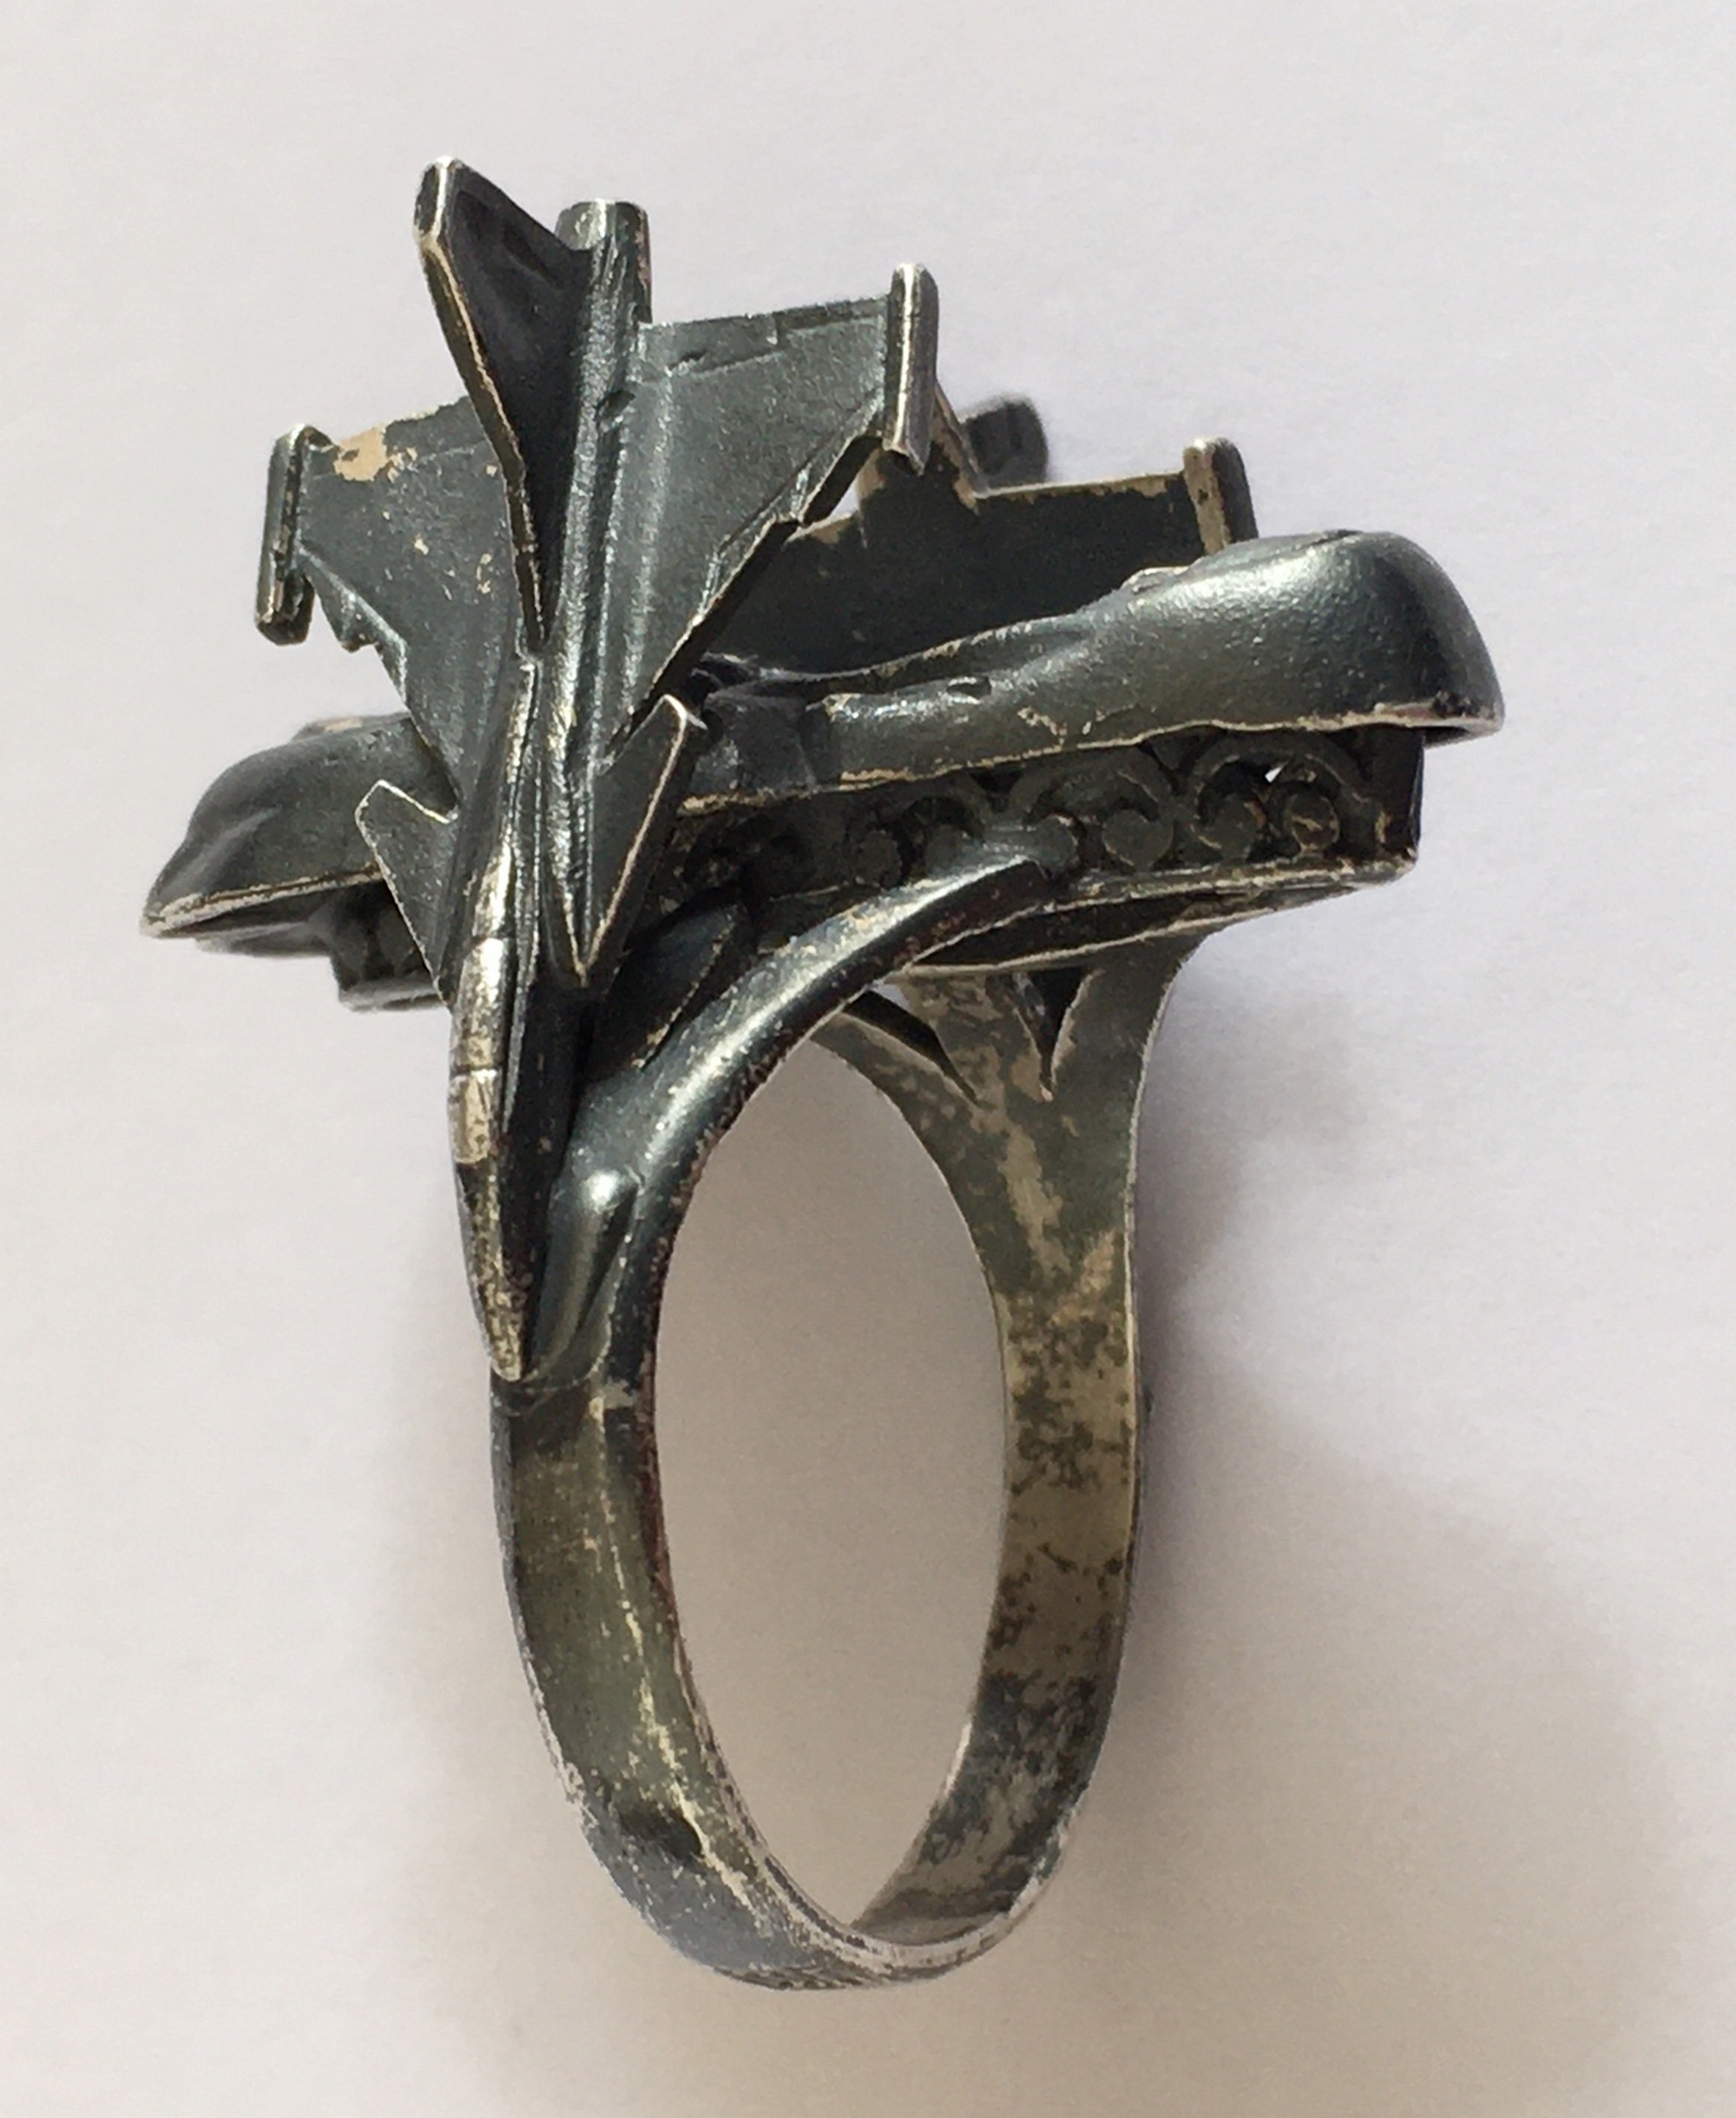 Vintage Modernist Silver Ring depicting Religion and War marked NSS - UK size N 1/2 - Image 3 of 3